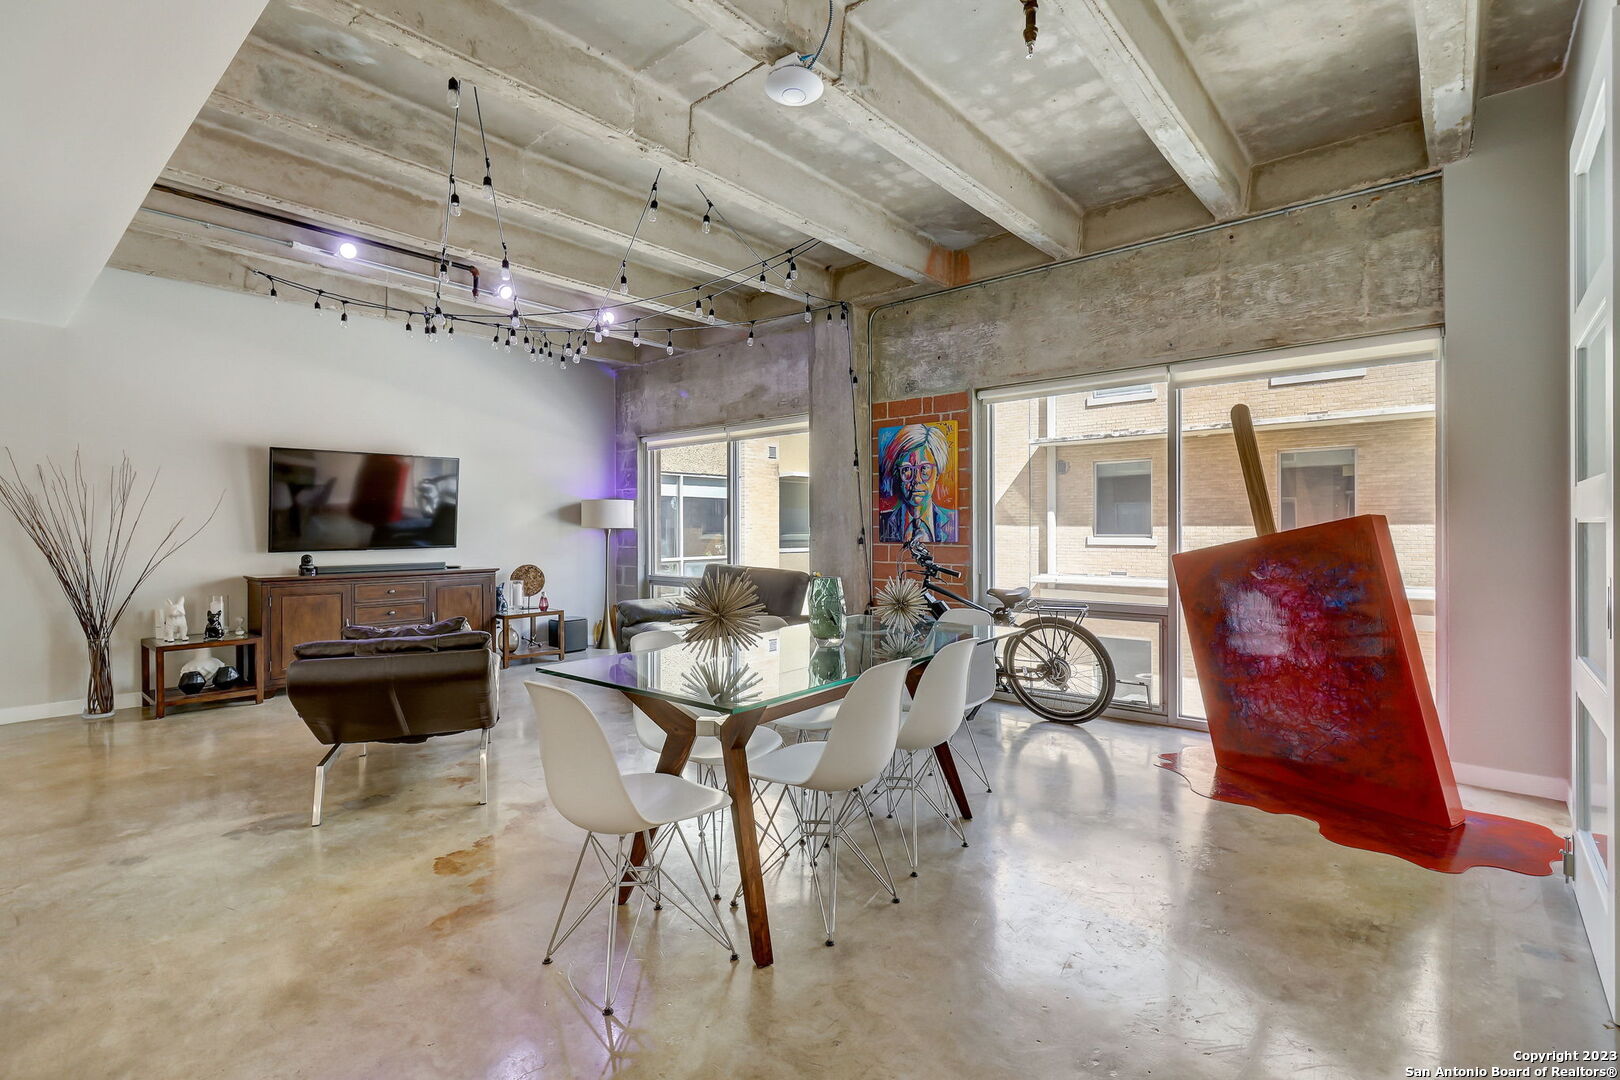 Stunning modern/industrial 3-bedroom loft located at the St. Benedicts Lofts in Southtown within walking distance to The Friendly Spot, Hot Joy, Little Em's, The Jewel, Titos and so much more! This unit boasts an open layout enveloped in natural light with gorgeous stained concrete and tile flooring throughout. The kitchen sits in the heart of the space featuring white Bosch appliances, a beautiful tile backsplash and opens to the spacious living area - perfect for entertaining. The primary suite is tucked away for privacy with an over-sized walk-in closet, full bath and fabulous views. Your secondary bedroom is just down the hall with a full bath adjacent and the third bedroom can also be used as a study/home office. The condo has many amenities including a 24-hour gym, additional storage space (#303), 2 covered parking spots (one with electricity ready for a car charger) and a sparkling pool with a grill area!